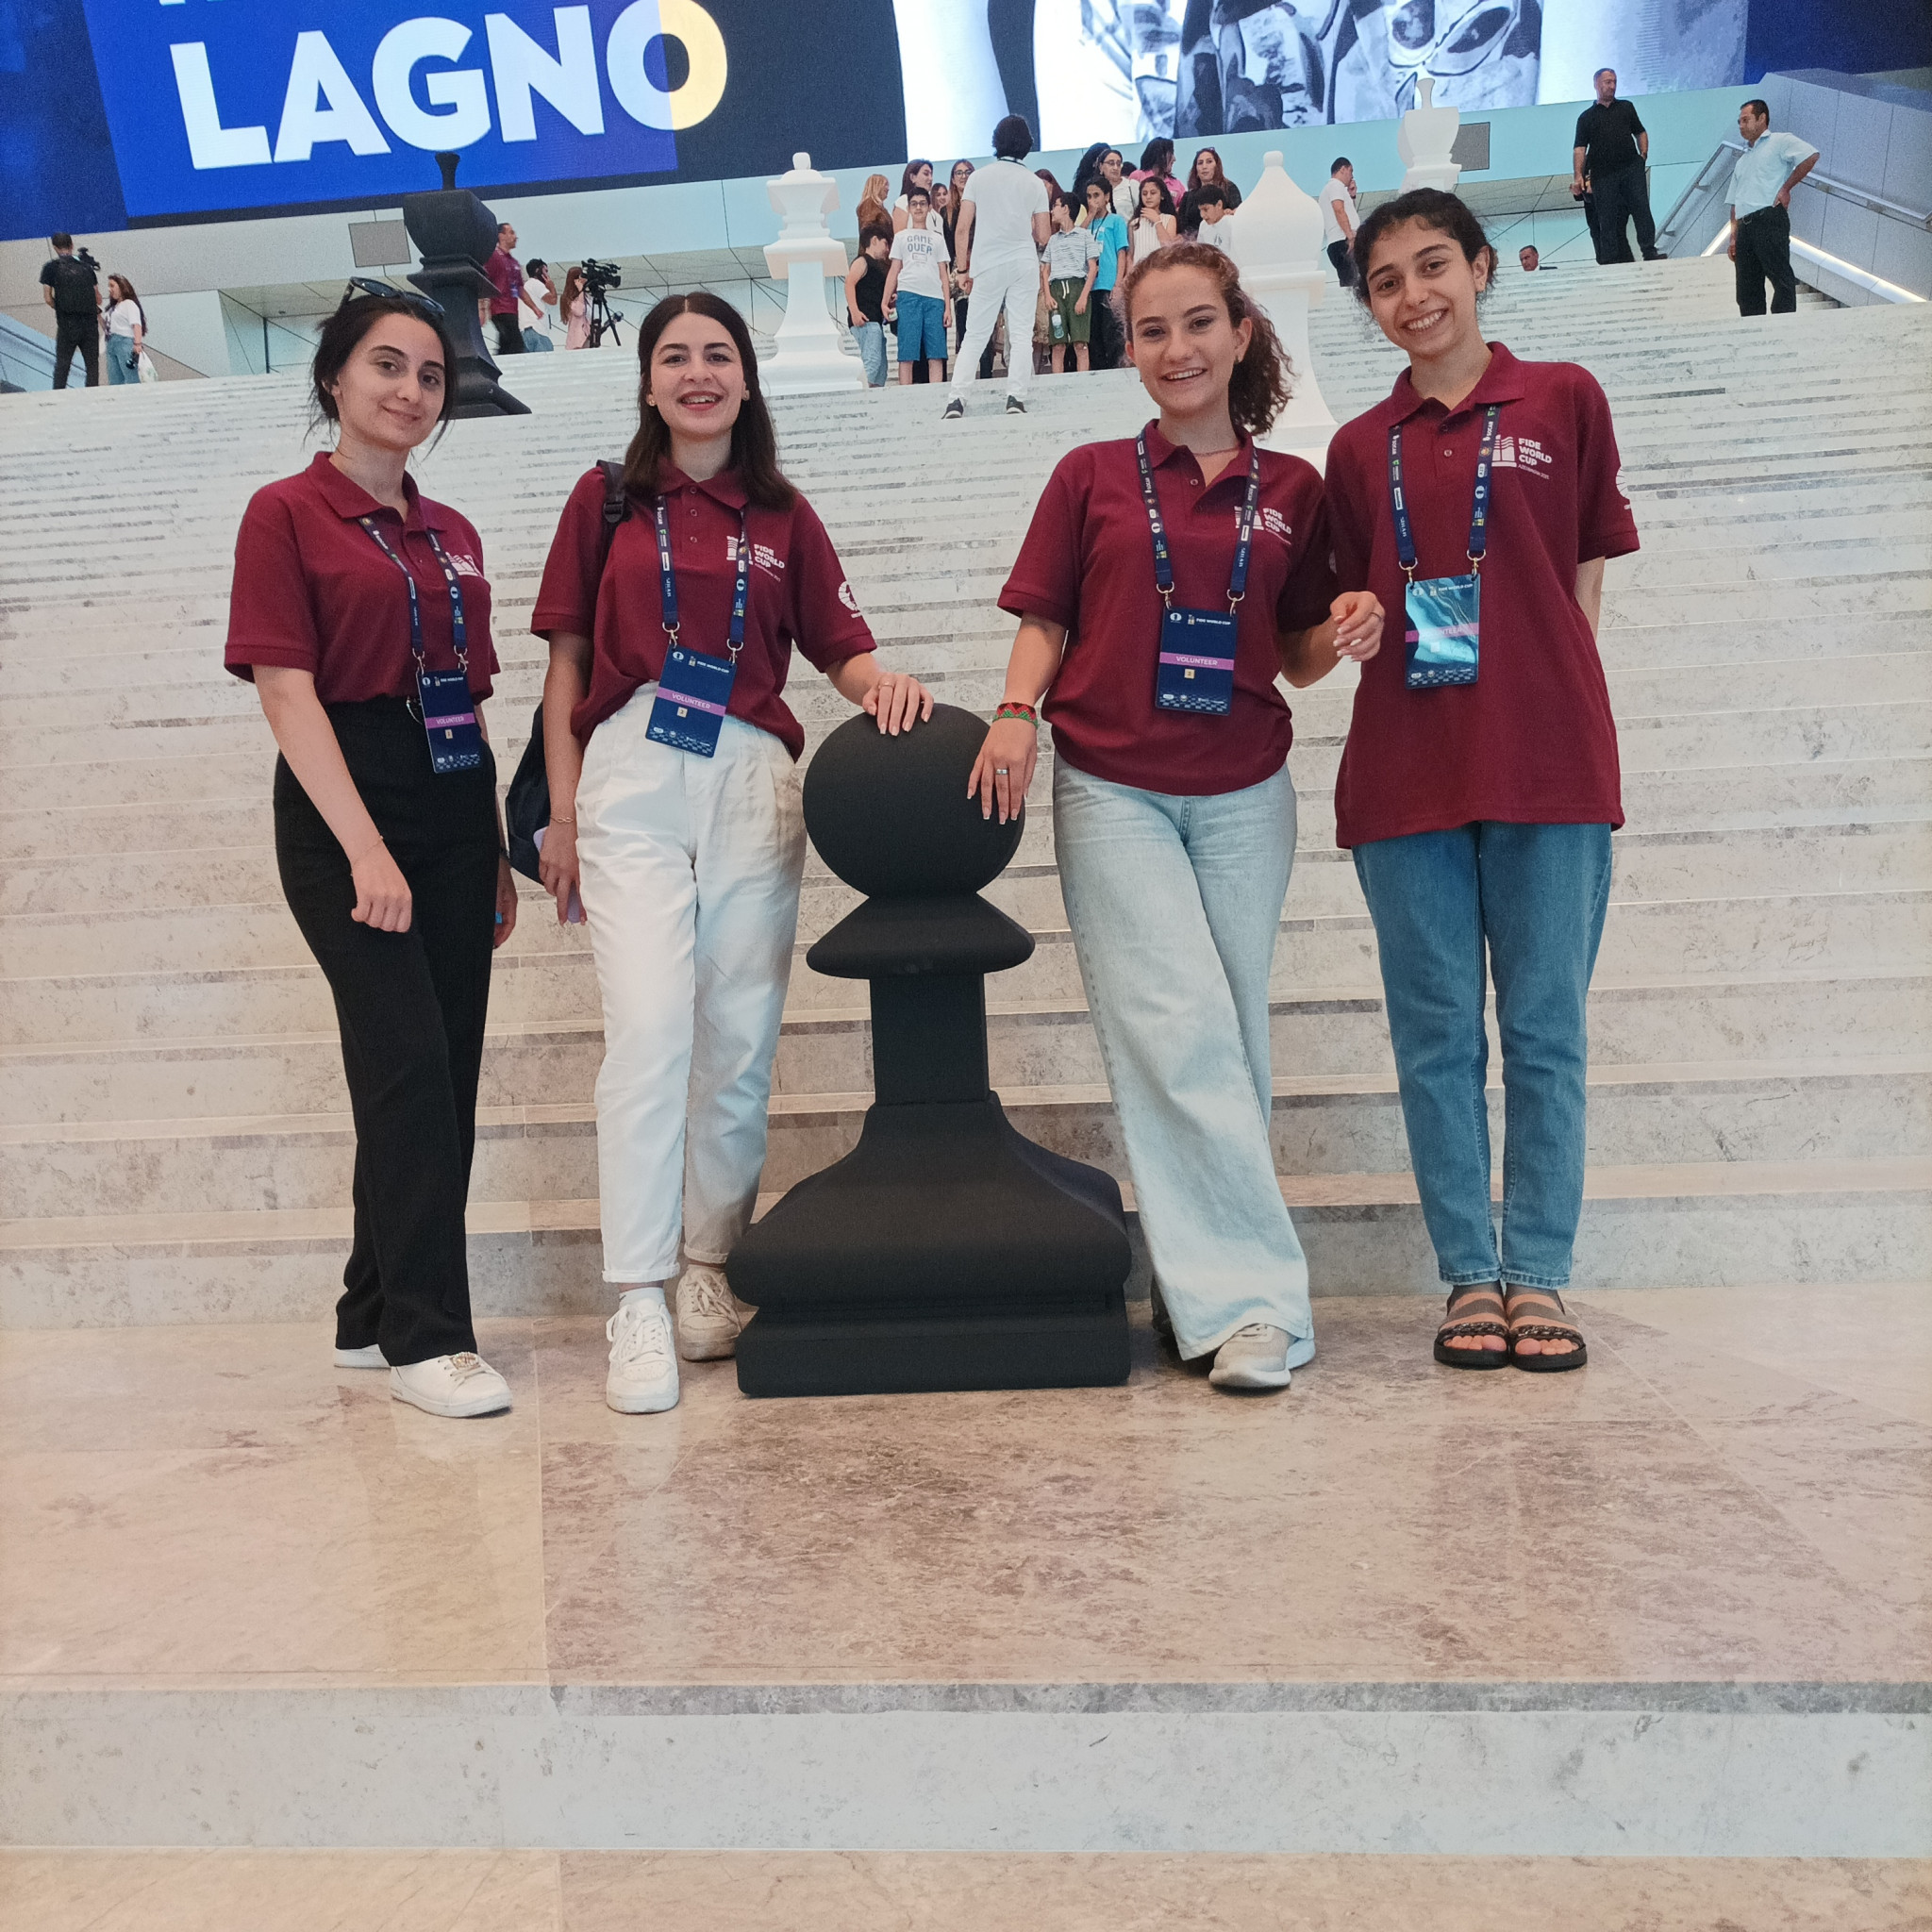 Volunteers pose with a giant pawn at the 2023 FIDE World Cup in Baku ©ITG